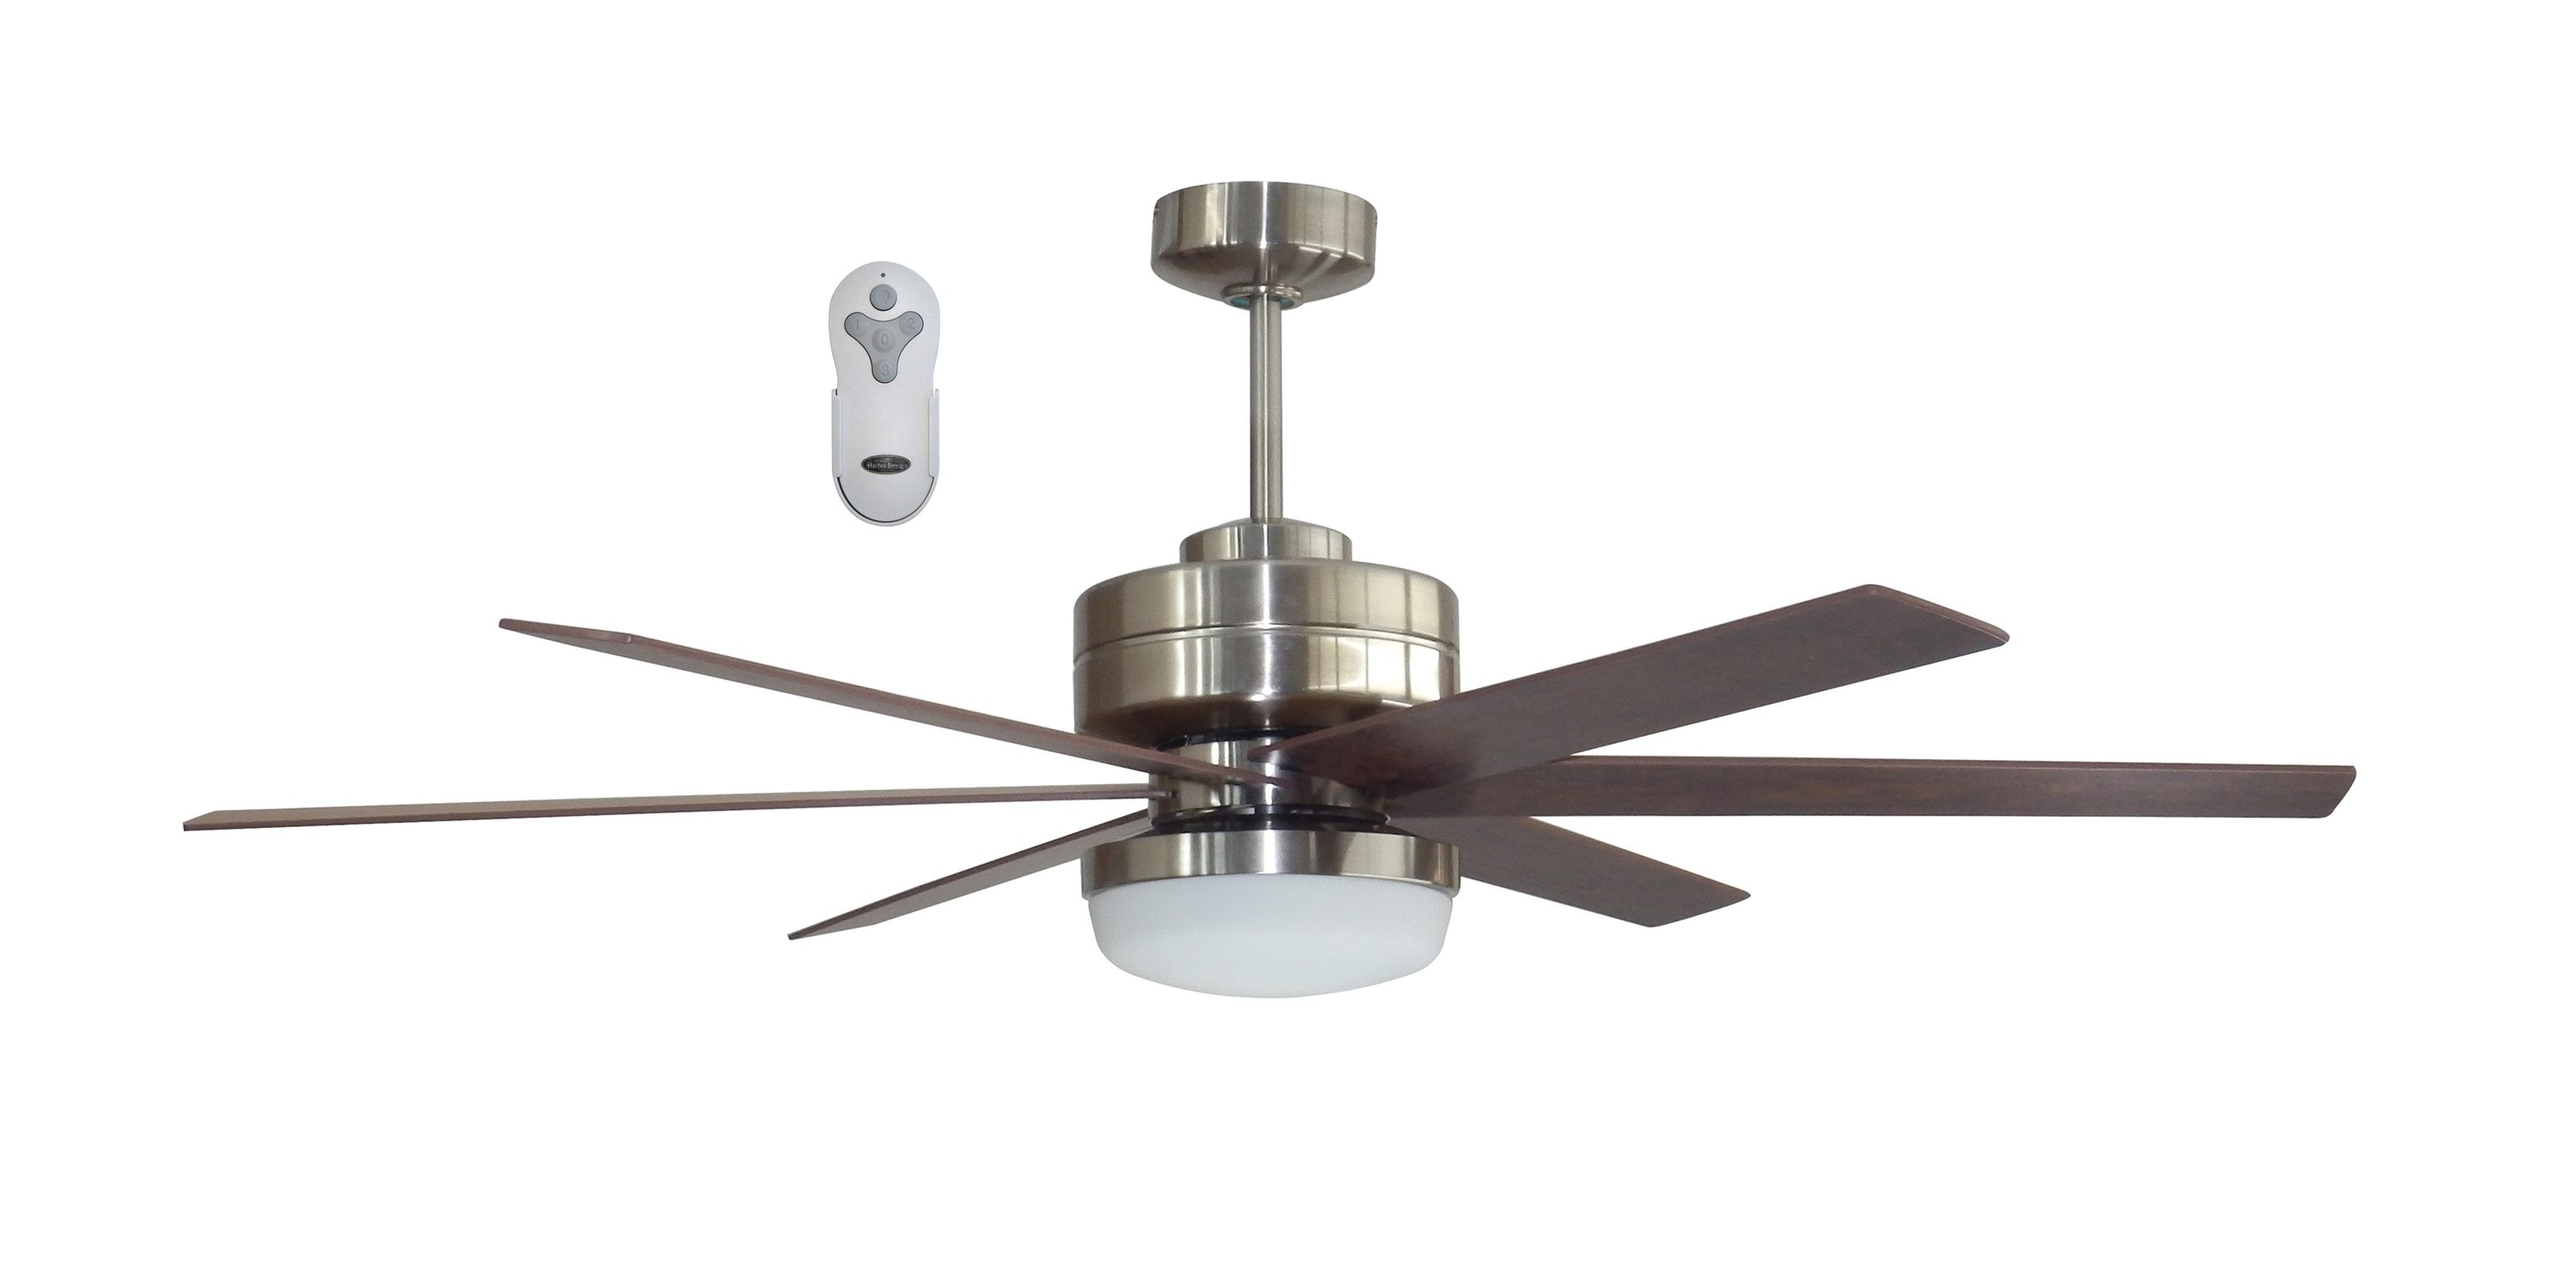 6-Reversible Blades Remote Control Brushed Nickel Ceiling Fan Light Kit 54 in 